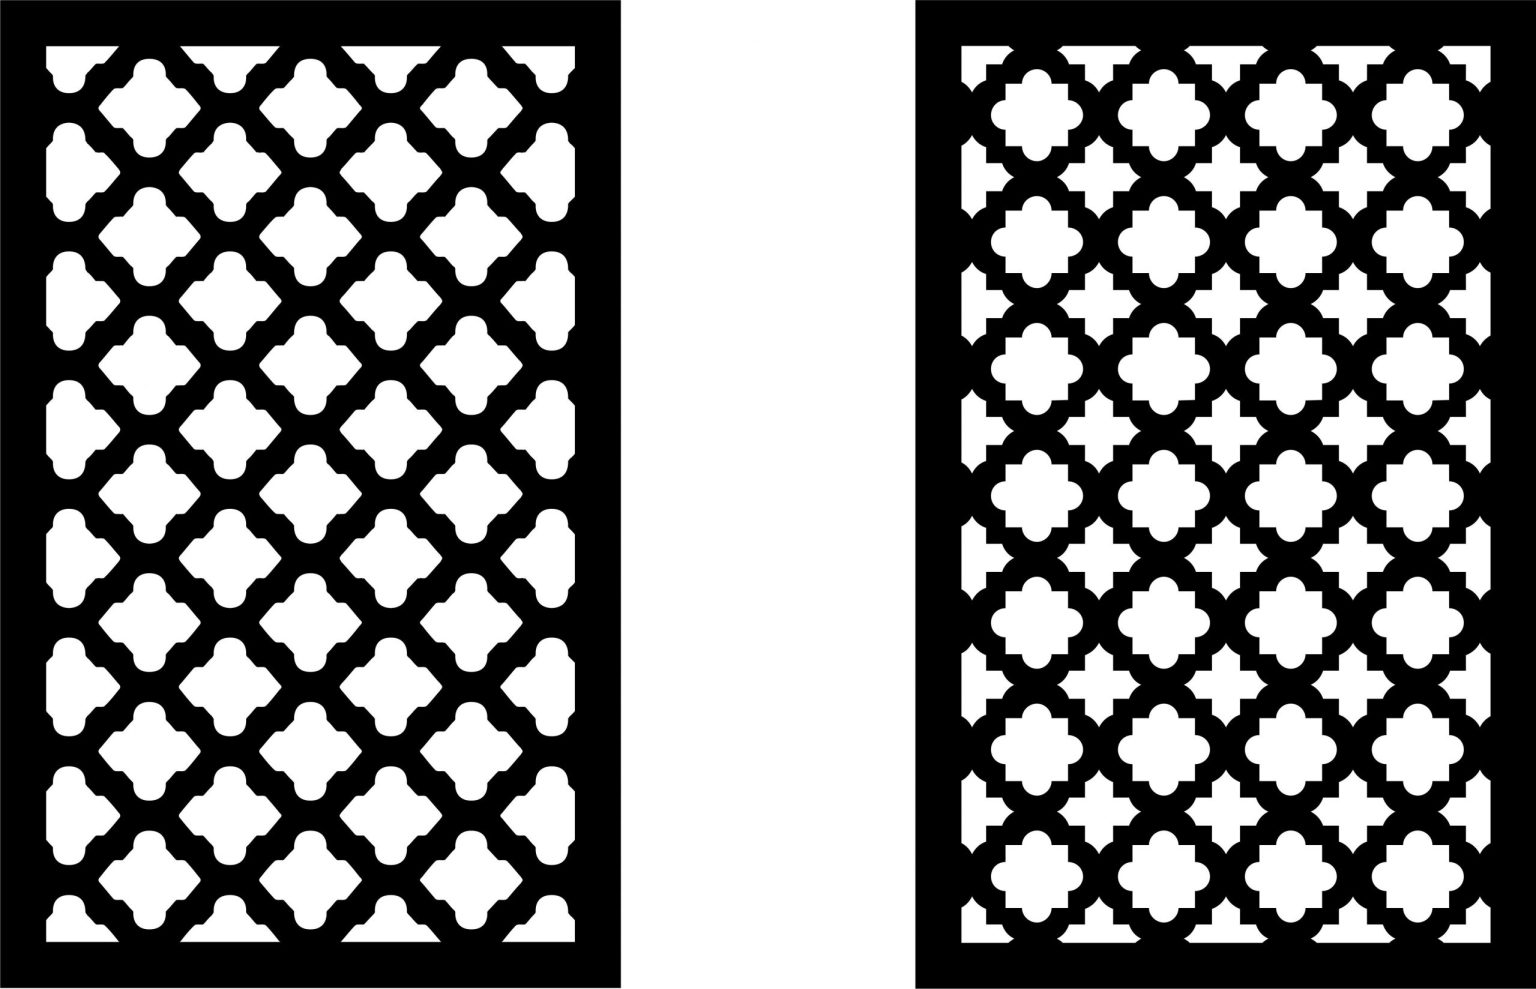 Decorative Screen Patterns For Laser Cutting 15 Free DXF File